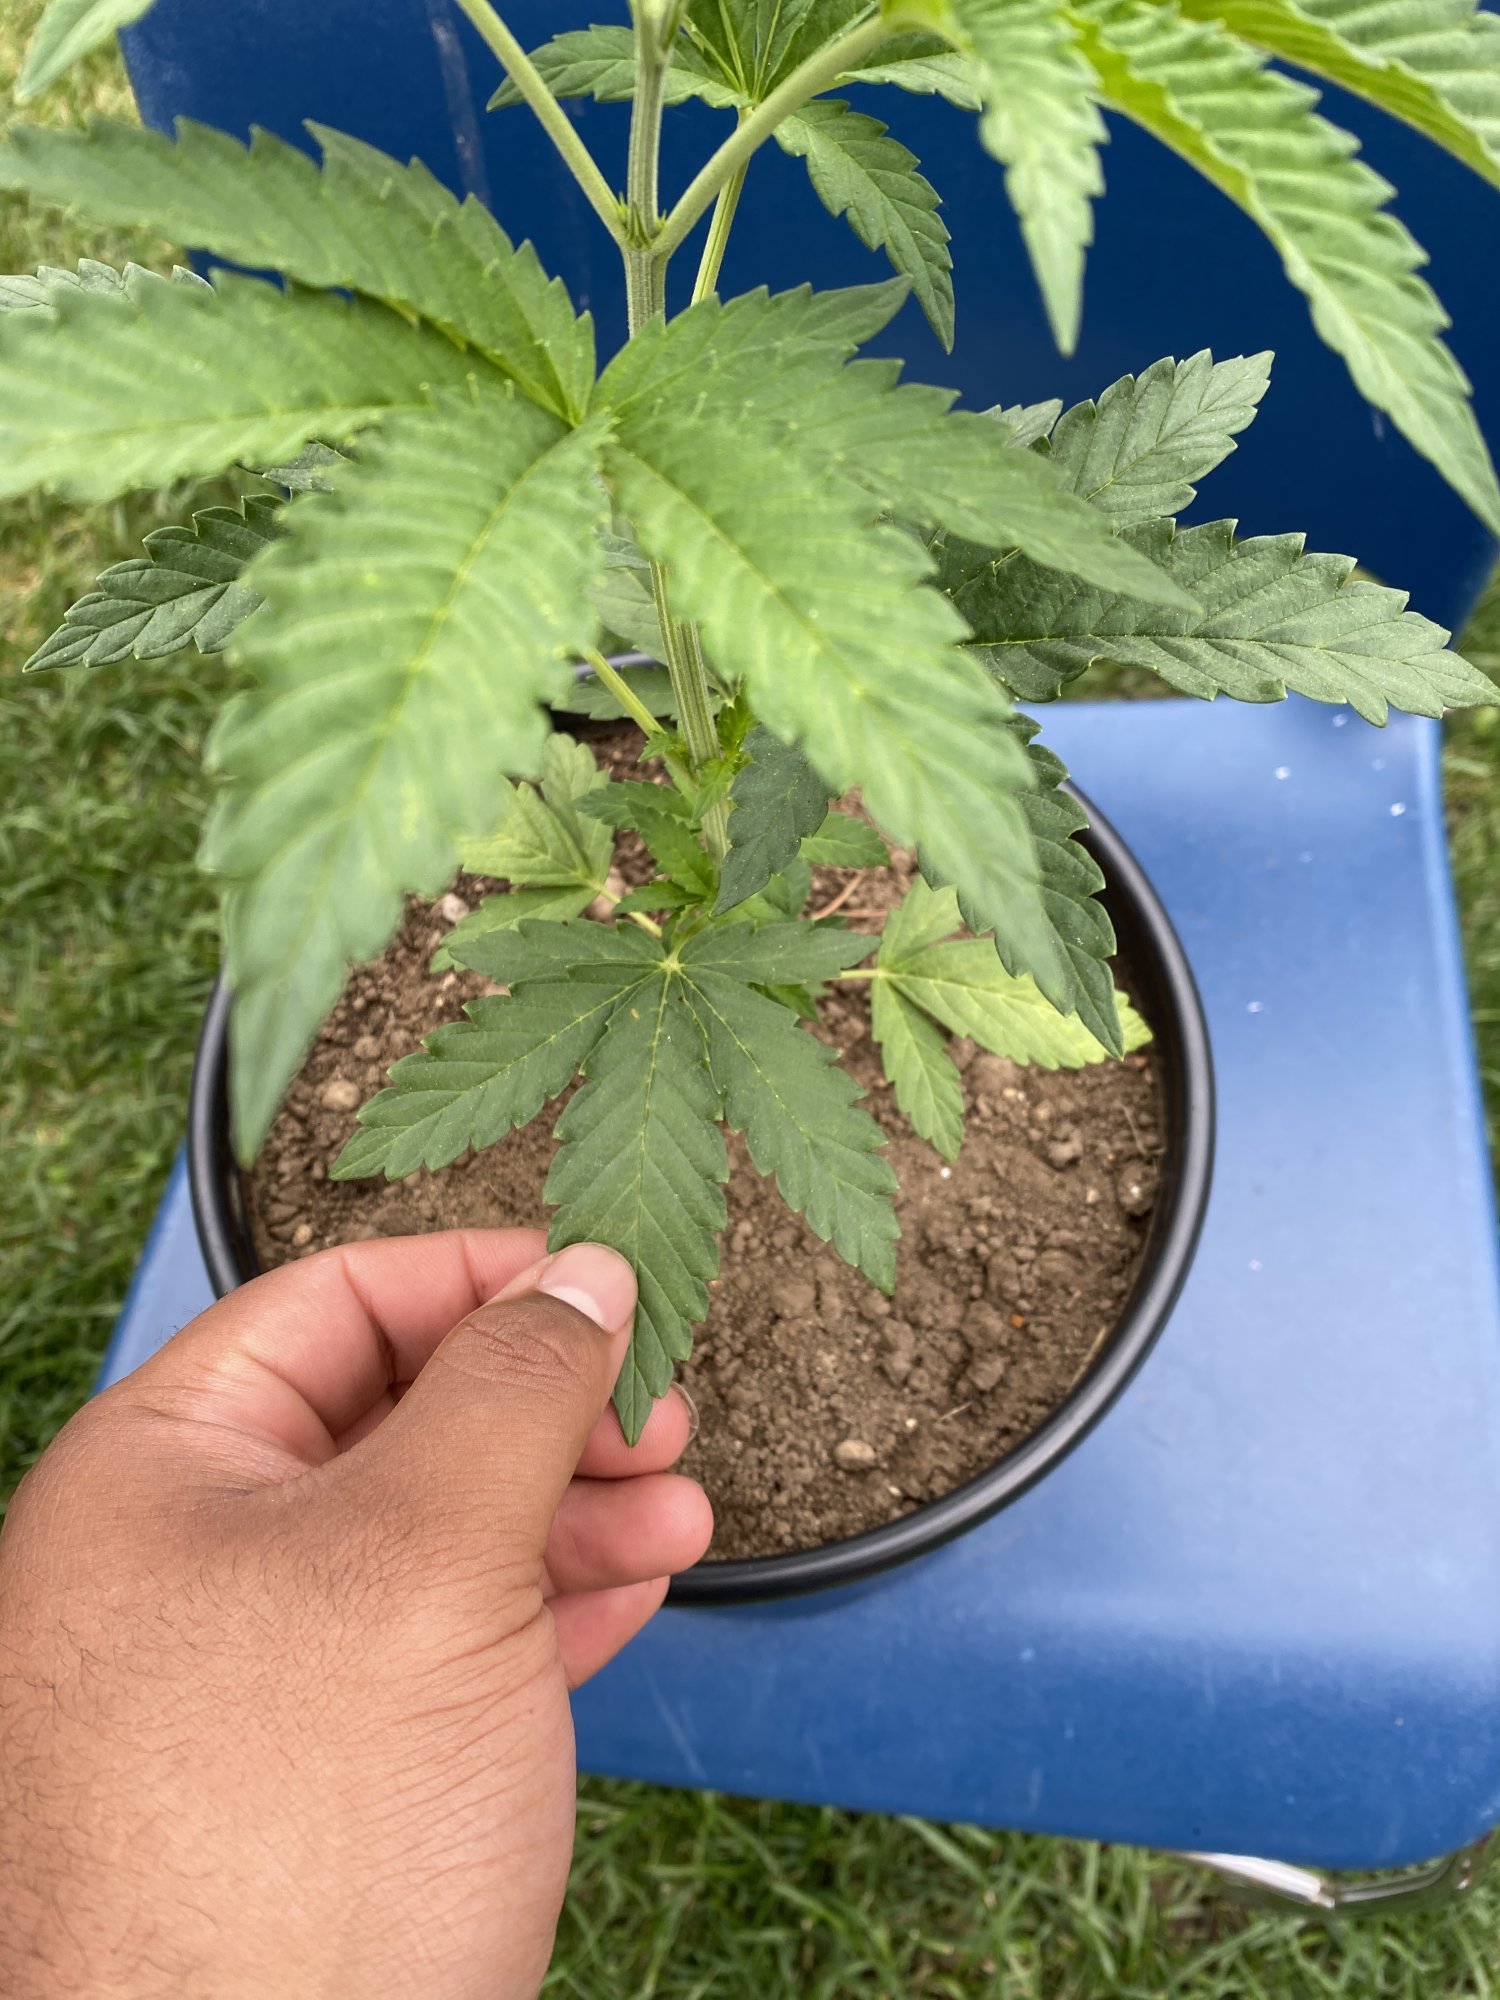 First time grower noticed the leaves on the bottom started turning greenish yellowish 4